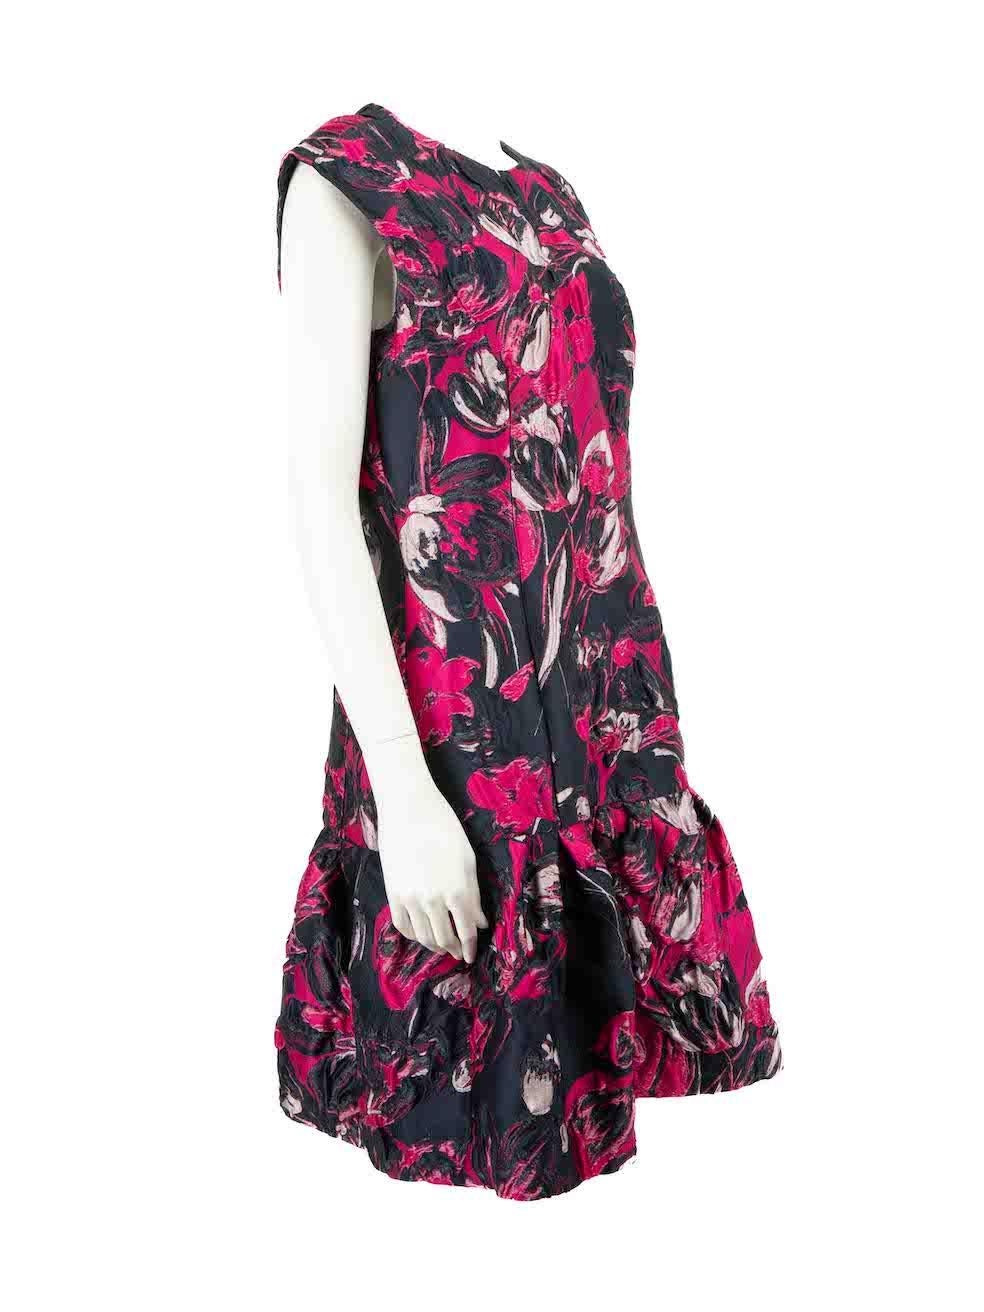 CONDITION is Very good. Hardly any visible wear to dress is evident on this used Carolina Herrera designer resale item. This item comes with original hanger and garment bag.
 
 Details
 Multicolour
 Polyester
 Dress
 Jacquard floral pattern
 Round